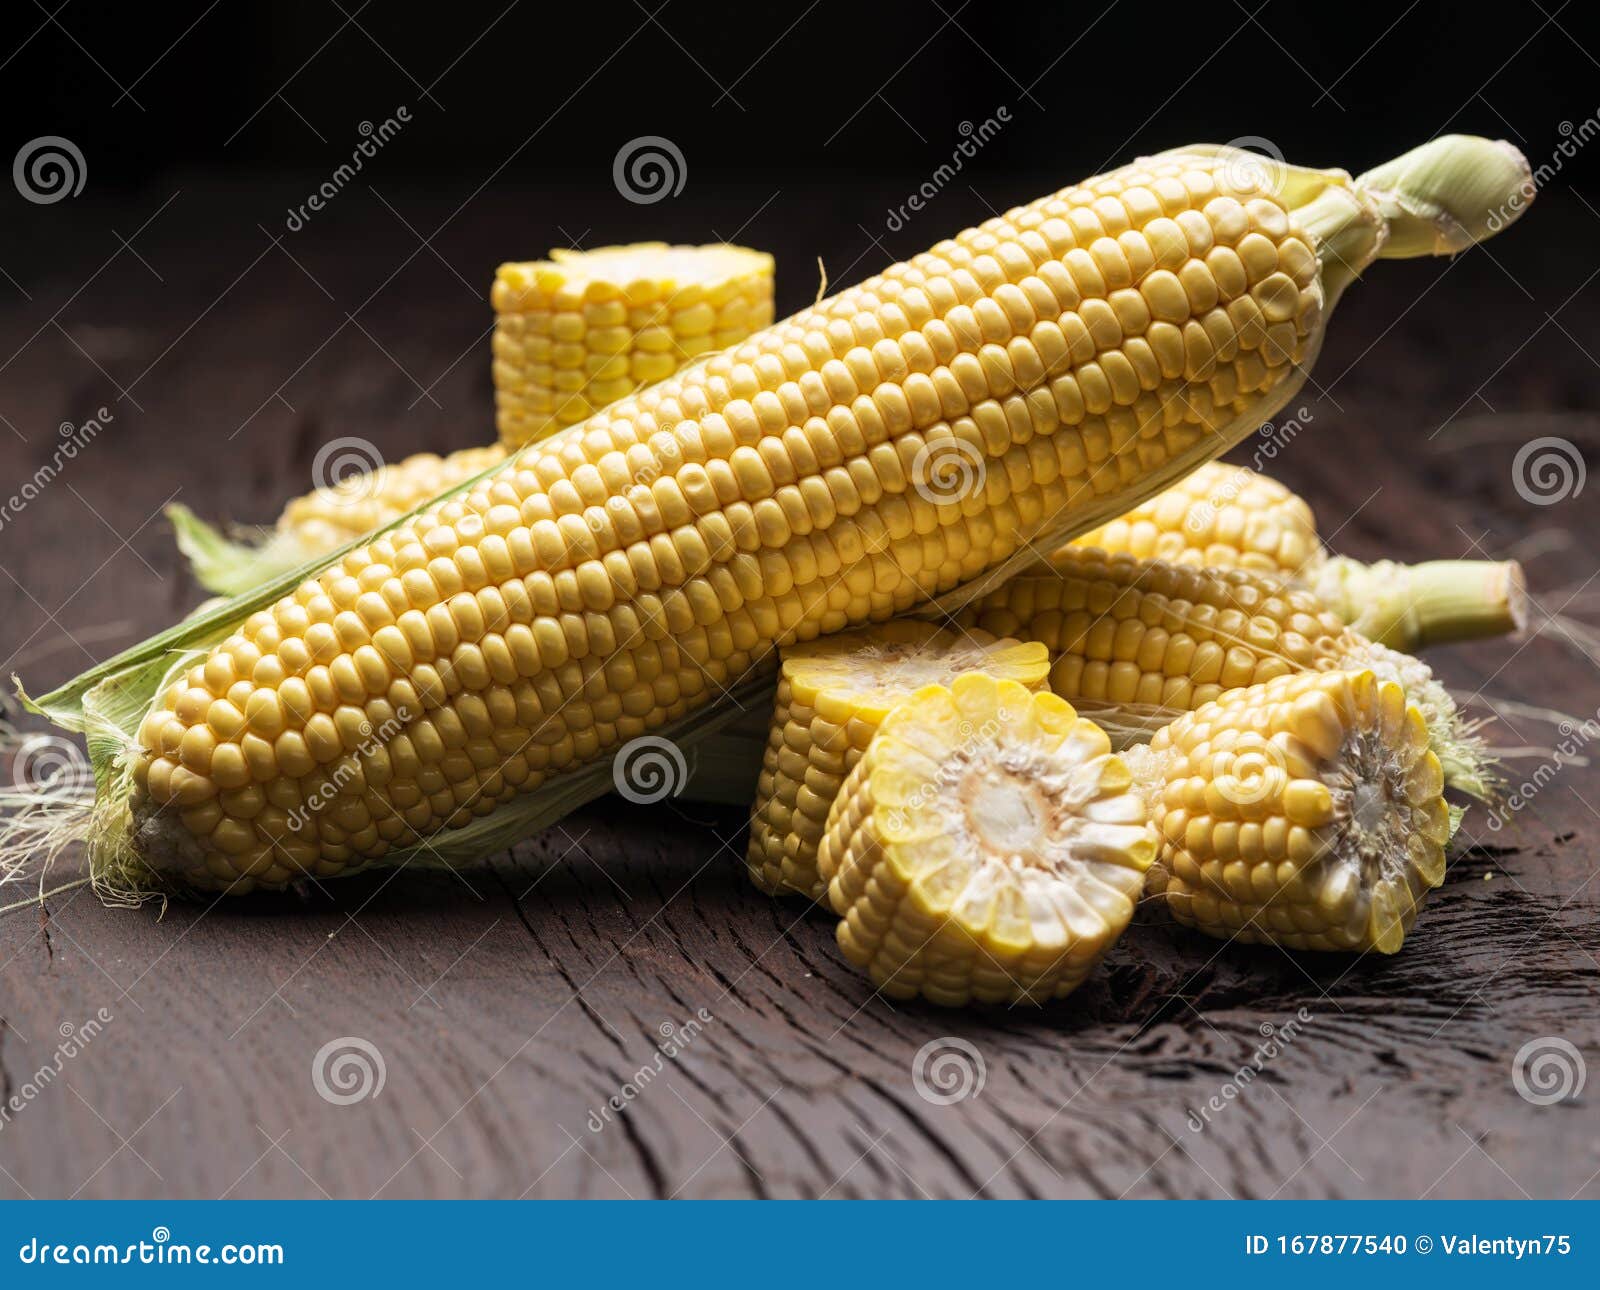 ear of maize or corn on the dark wooden background